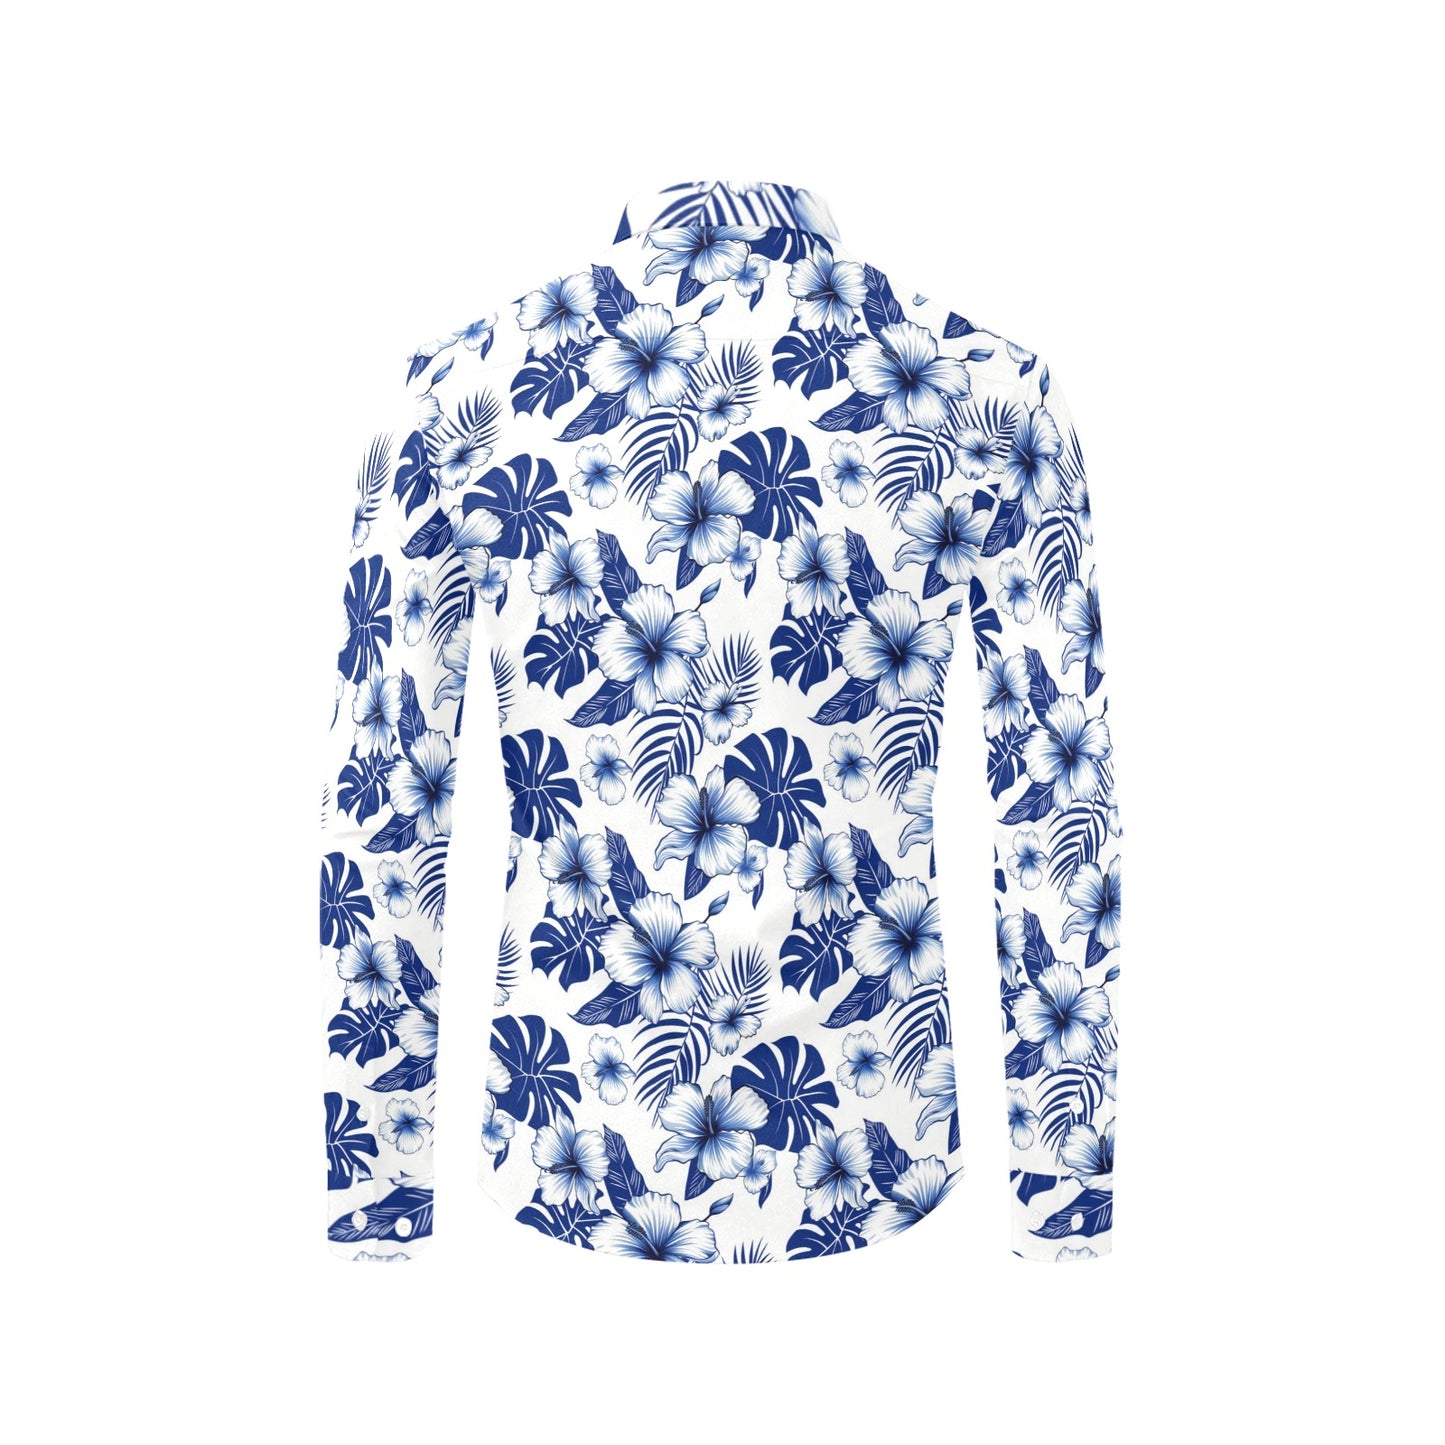 Blue White Hibiscus Long Sleeve Men Button Up Shirt, Navy Floral Flowers Tropical Print Male Guys Buttoned Down Collar Casual Dress Shirt